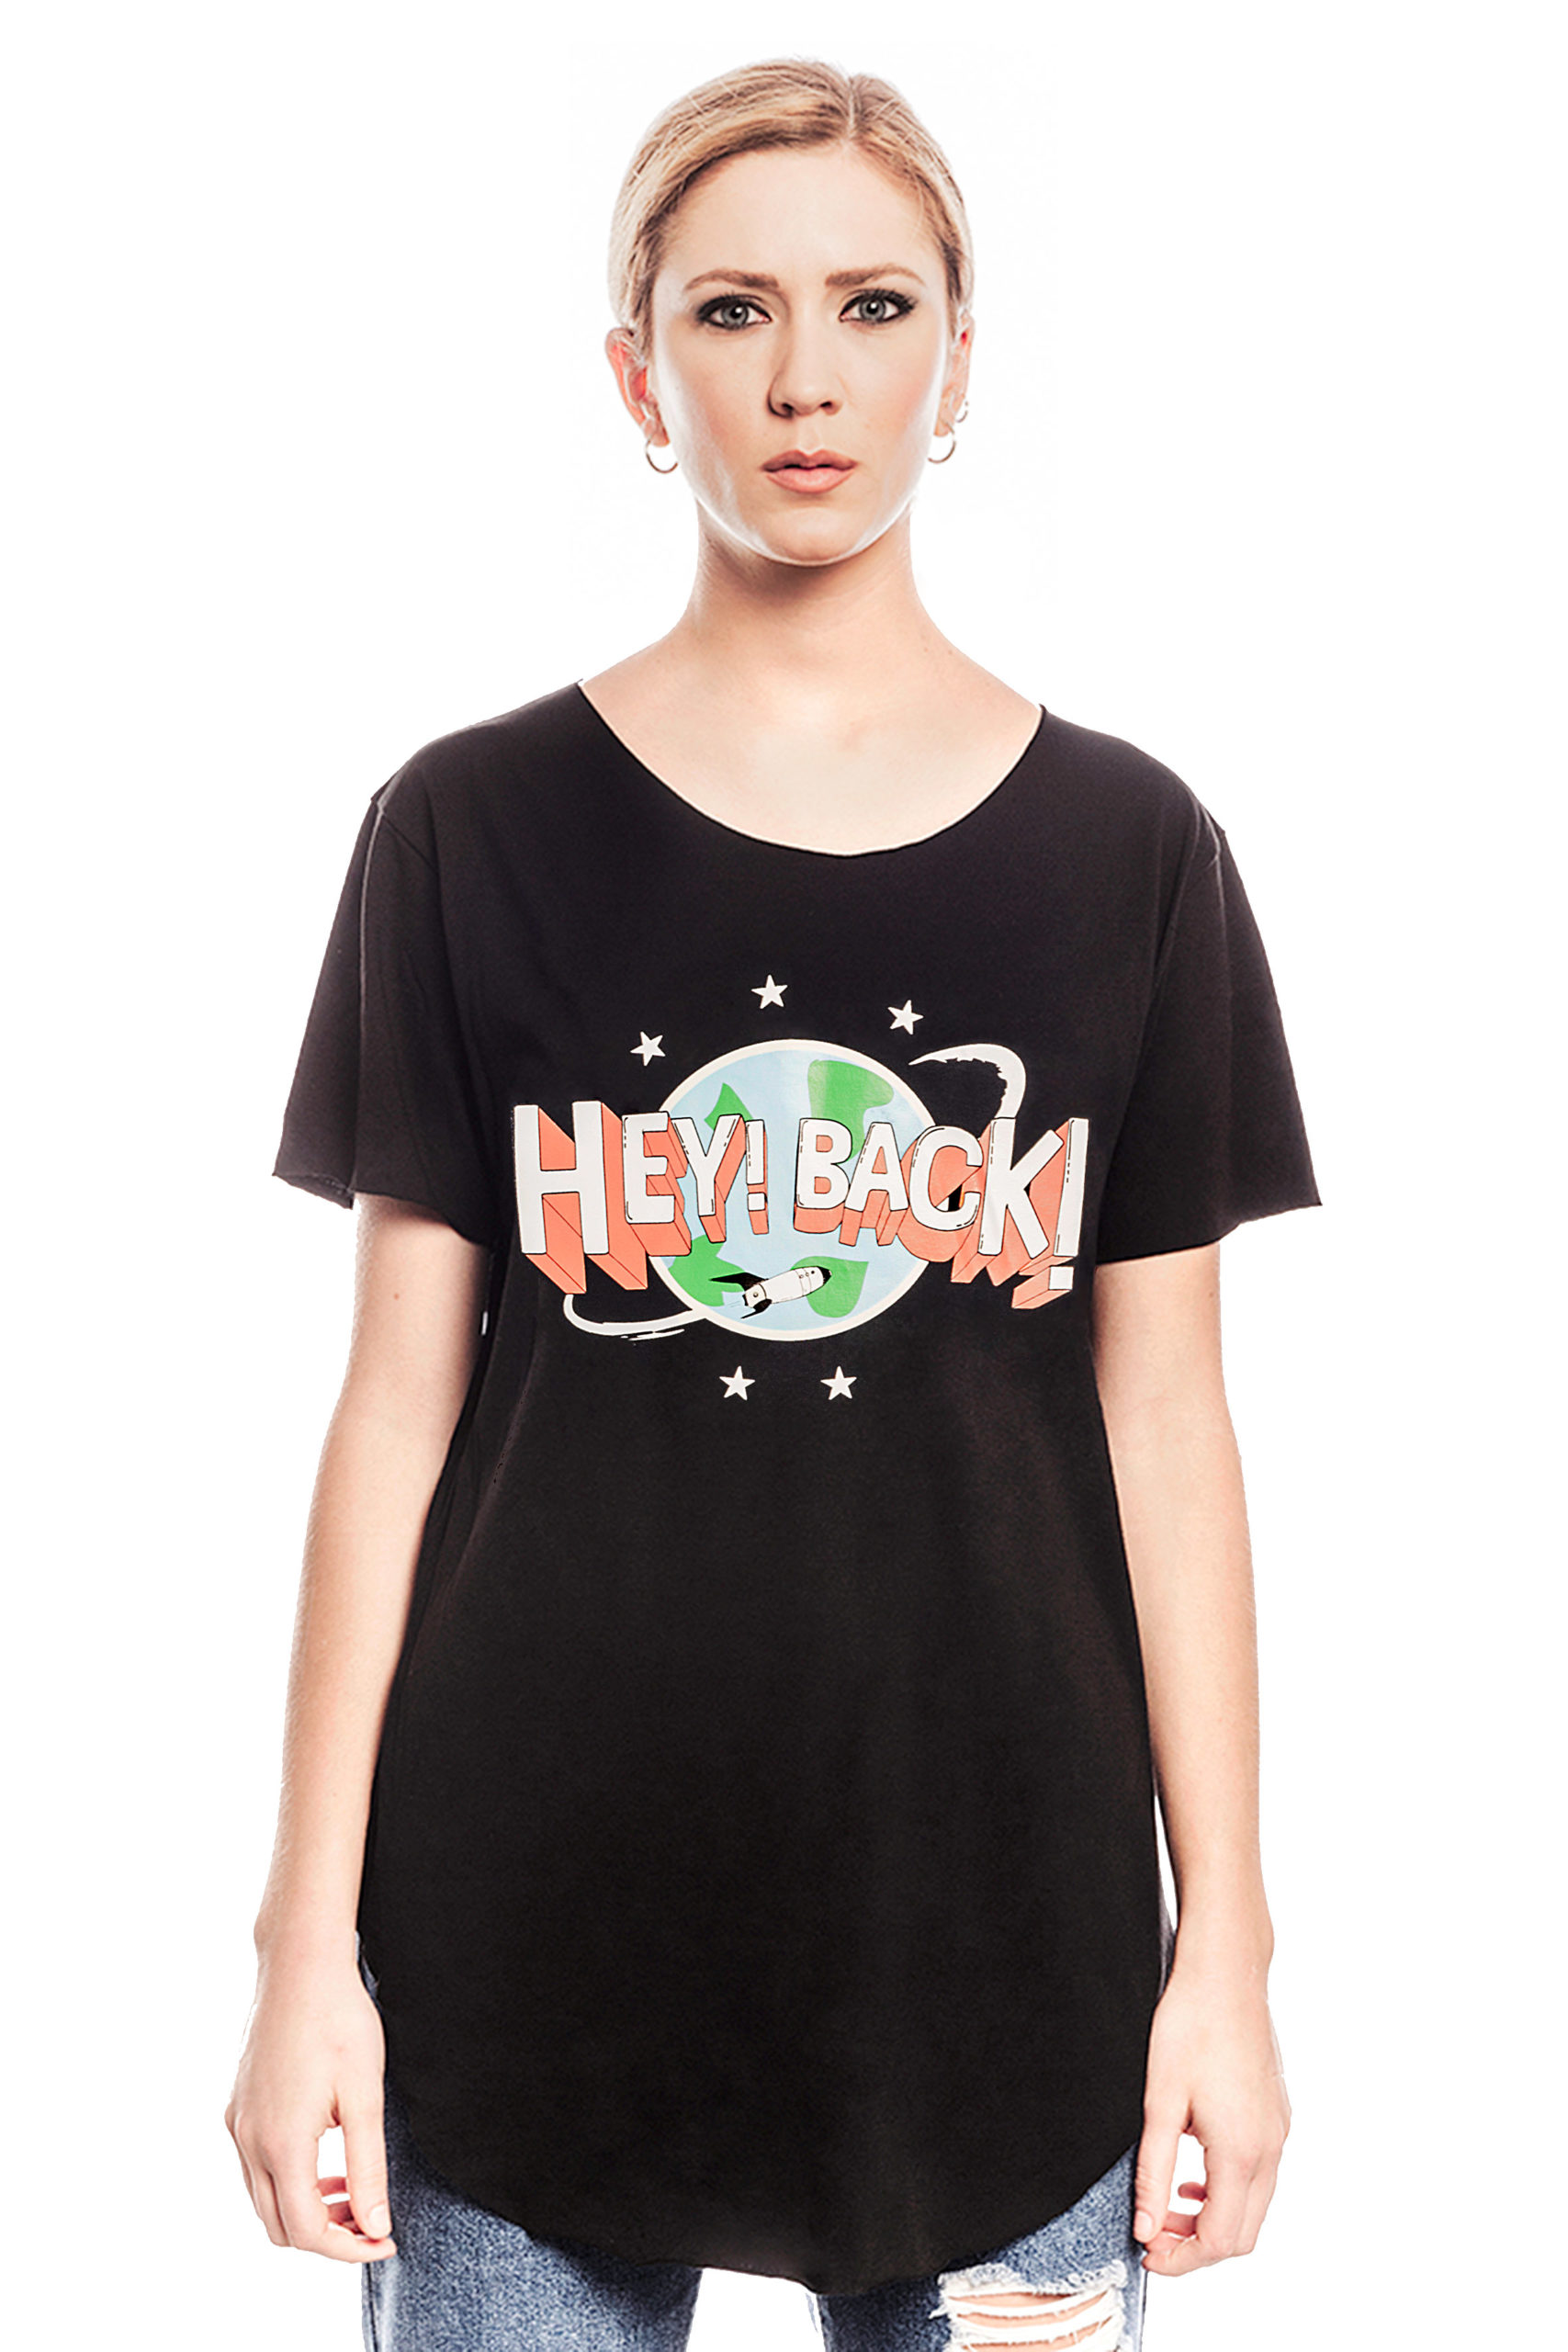 HEY! BACK! PLANET T-SHIRT WOMAN – Boyfriend Style – HEY! BACK! PLANET SUMMER17 COLLECTION